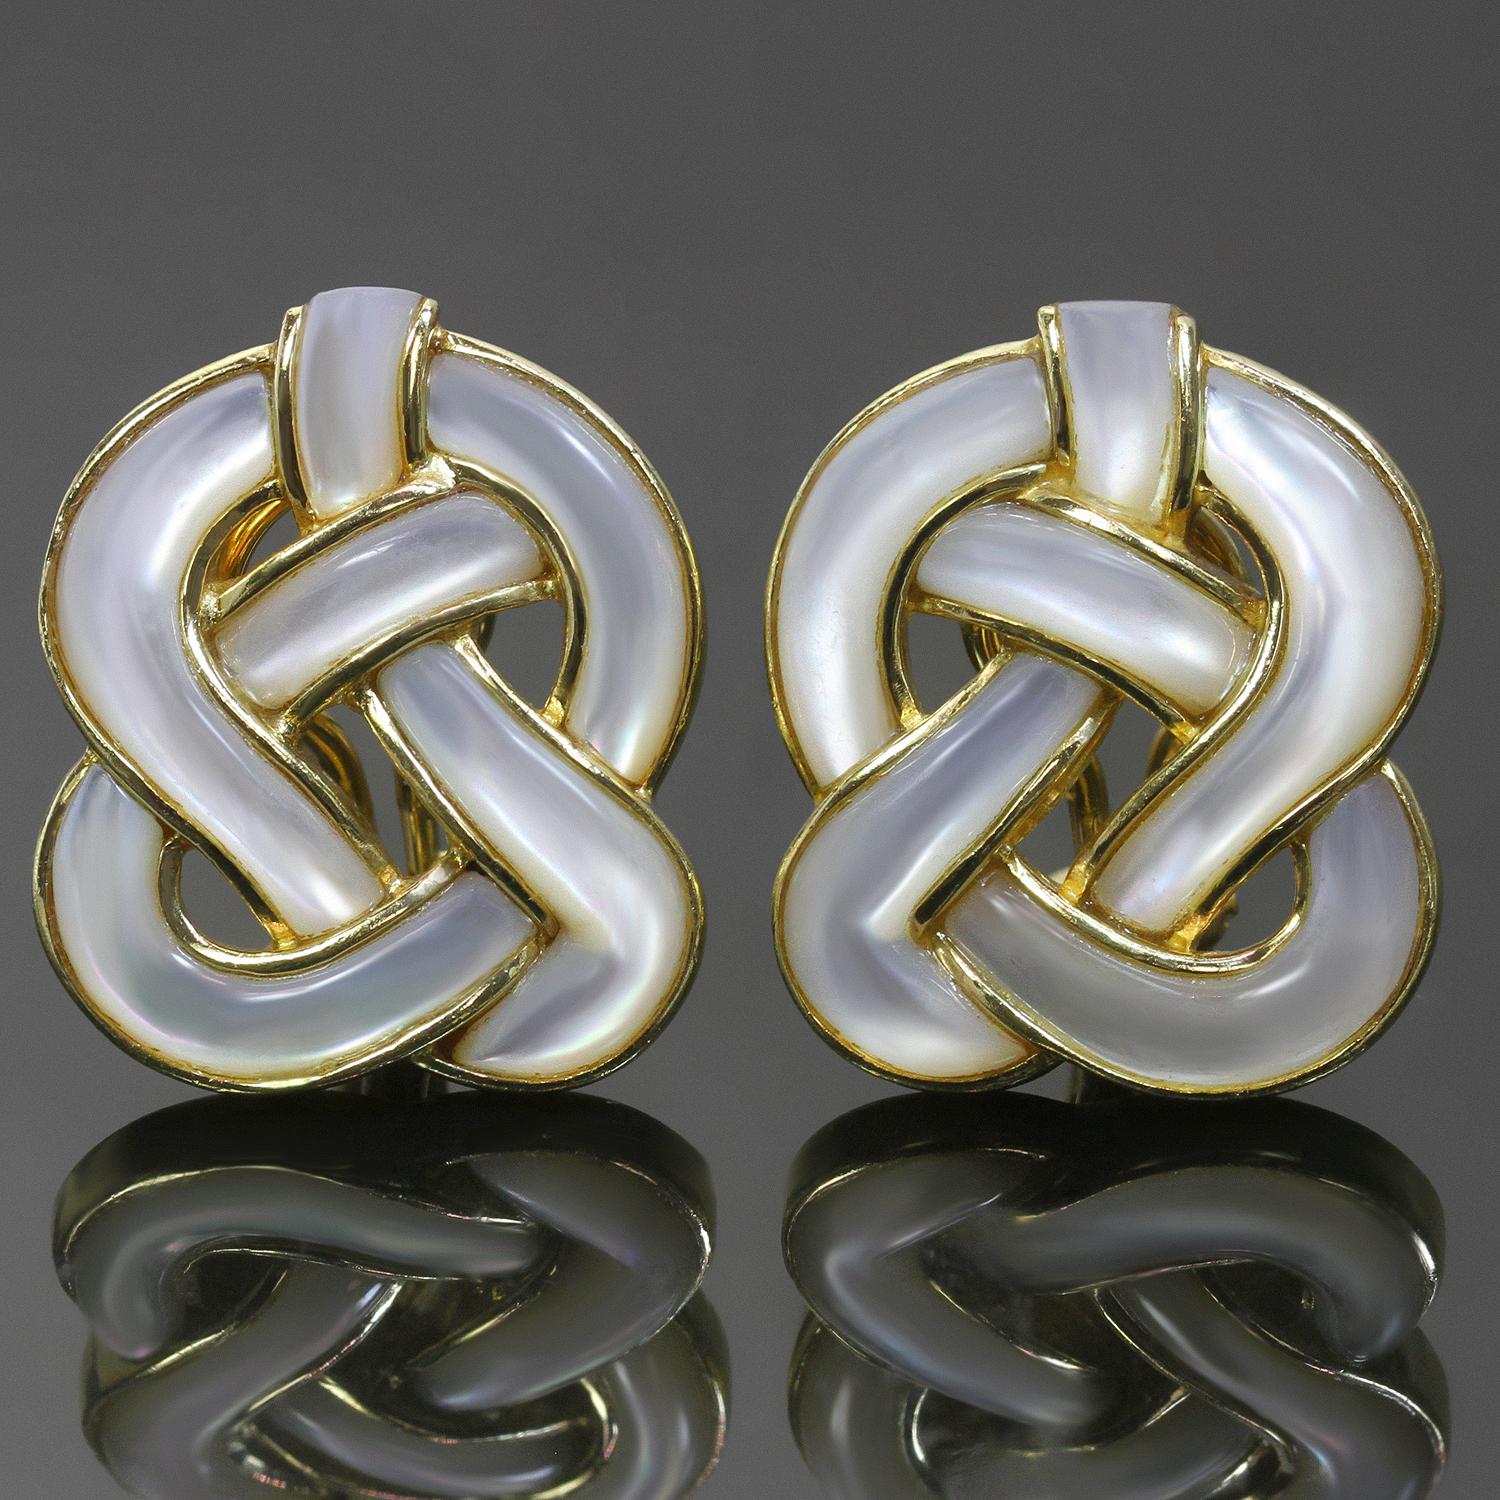 These classic vintage Tiffany & Co. clip-on earrings were designed by Angela Cummings and feature an elegant knotted design crafted in 18k yellow gold and inlaid with Mother-of-Pearl. Show normal signs of wear including light scratches and minor